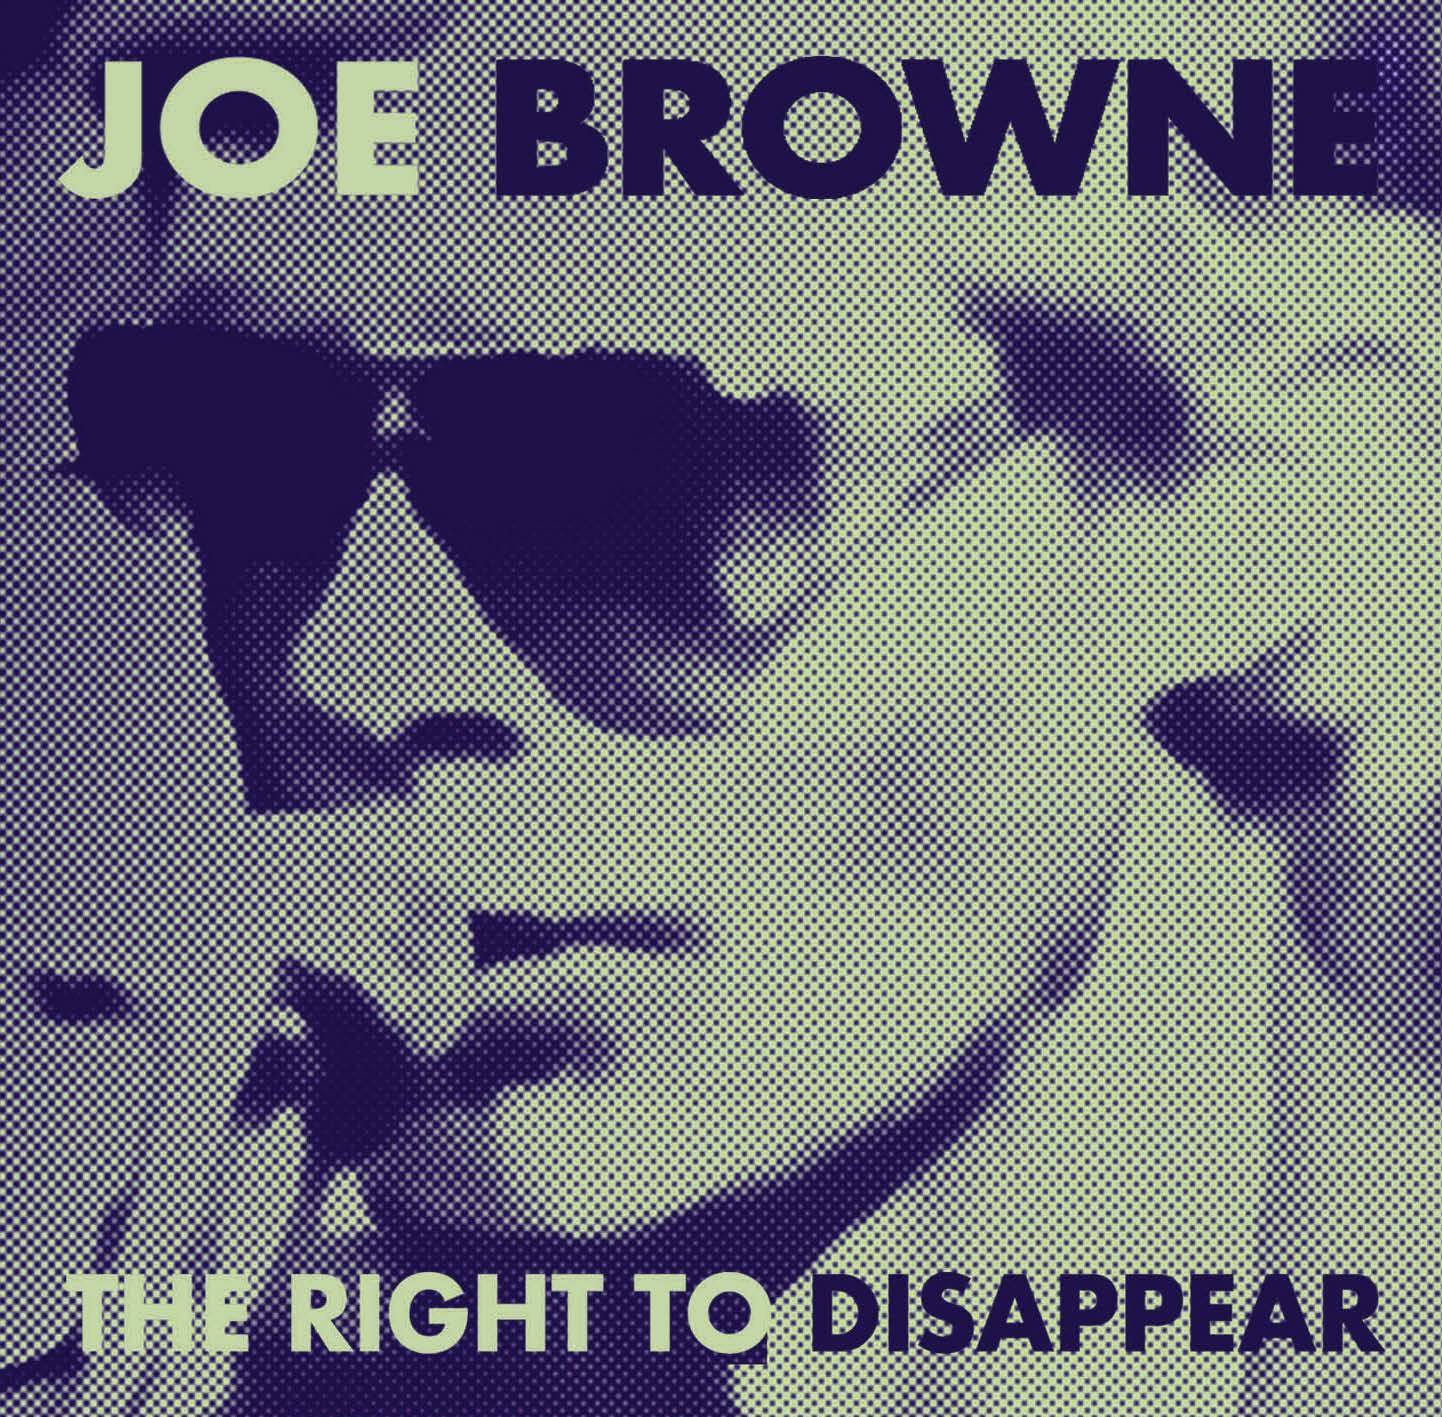 Joe Browne - The Right To Disappear CD